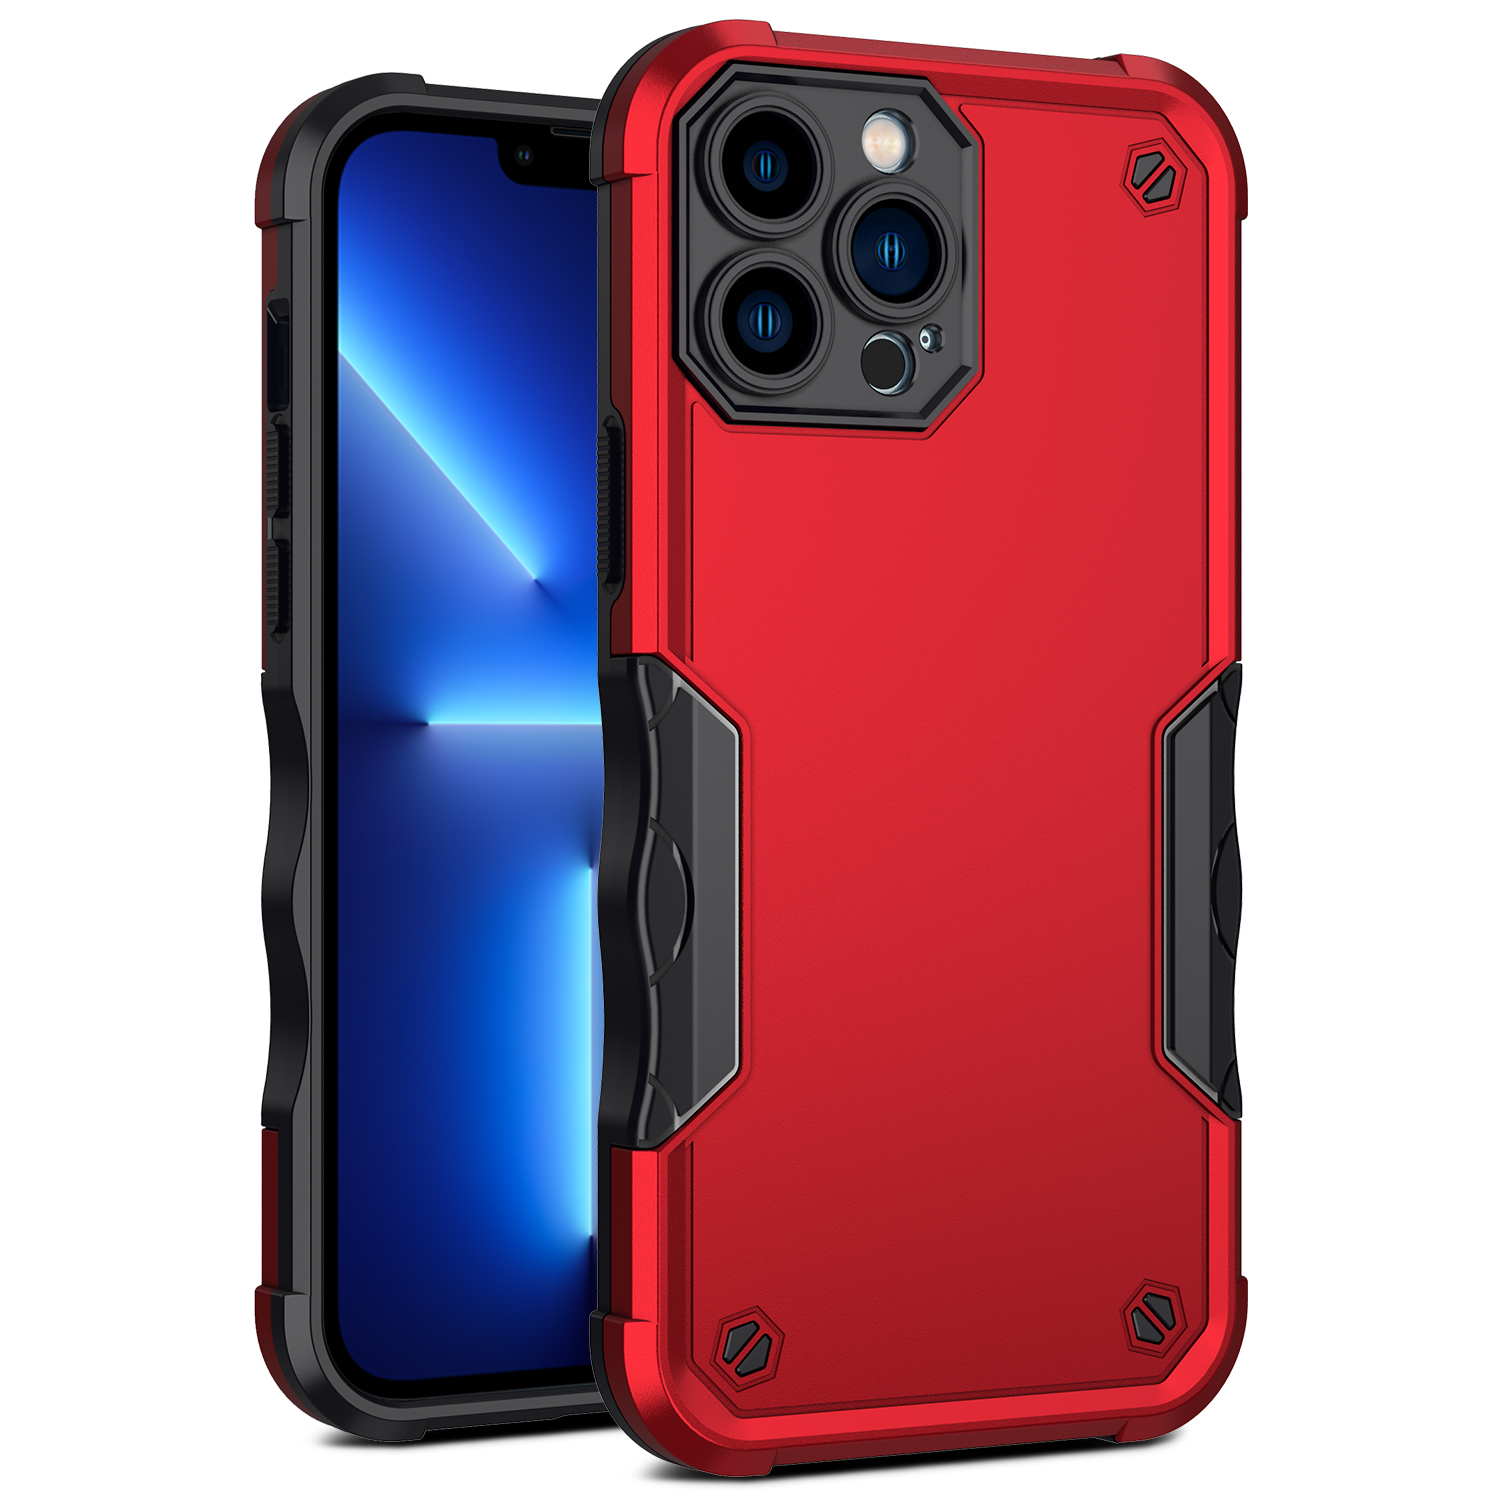 iPhone 11 Case Rugged Armor